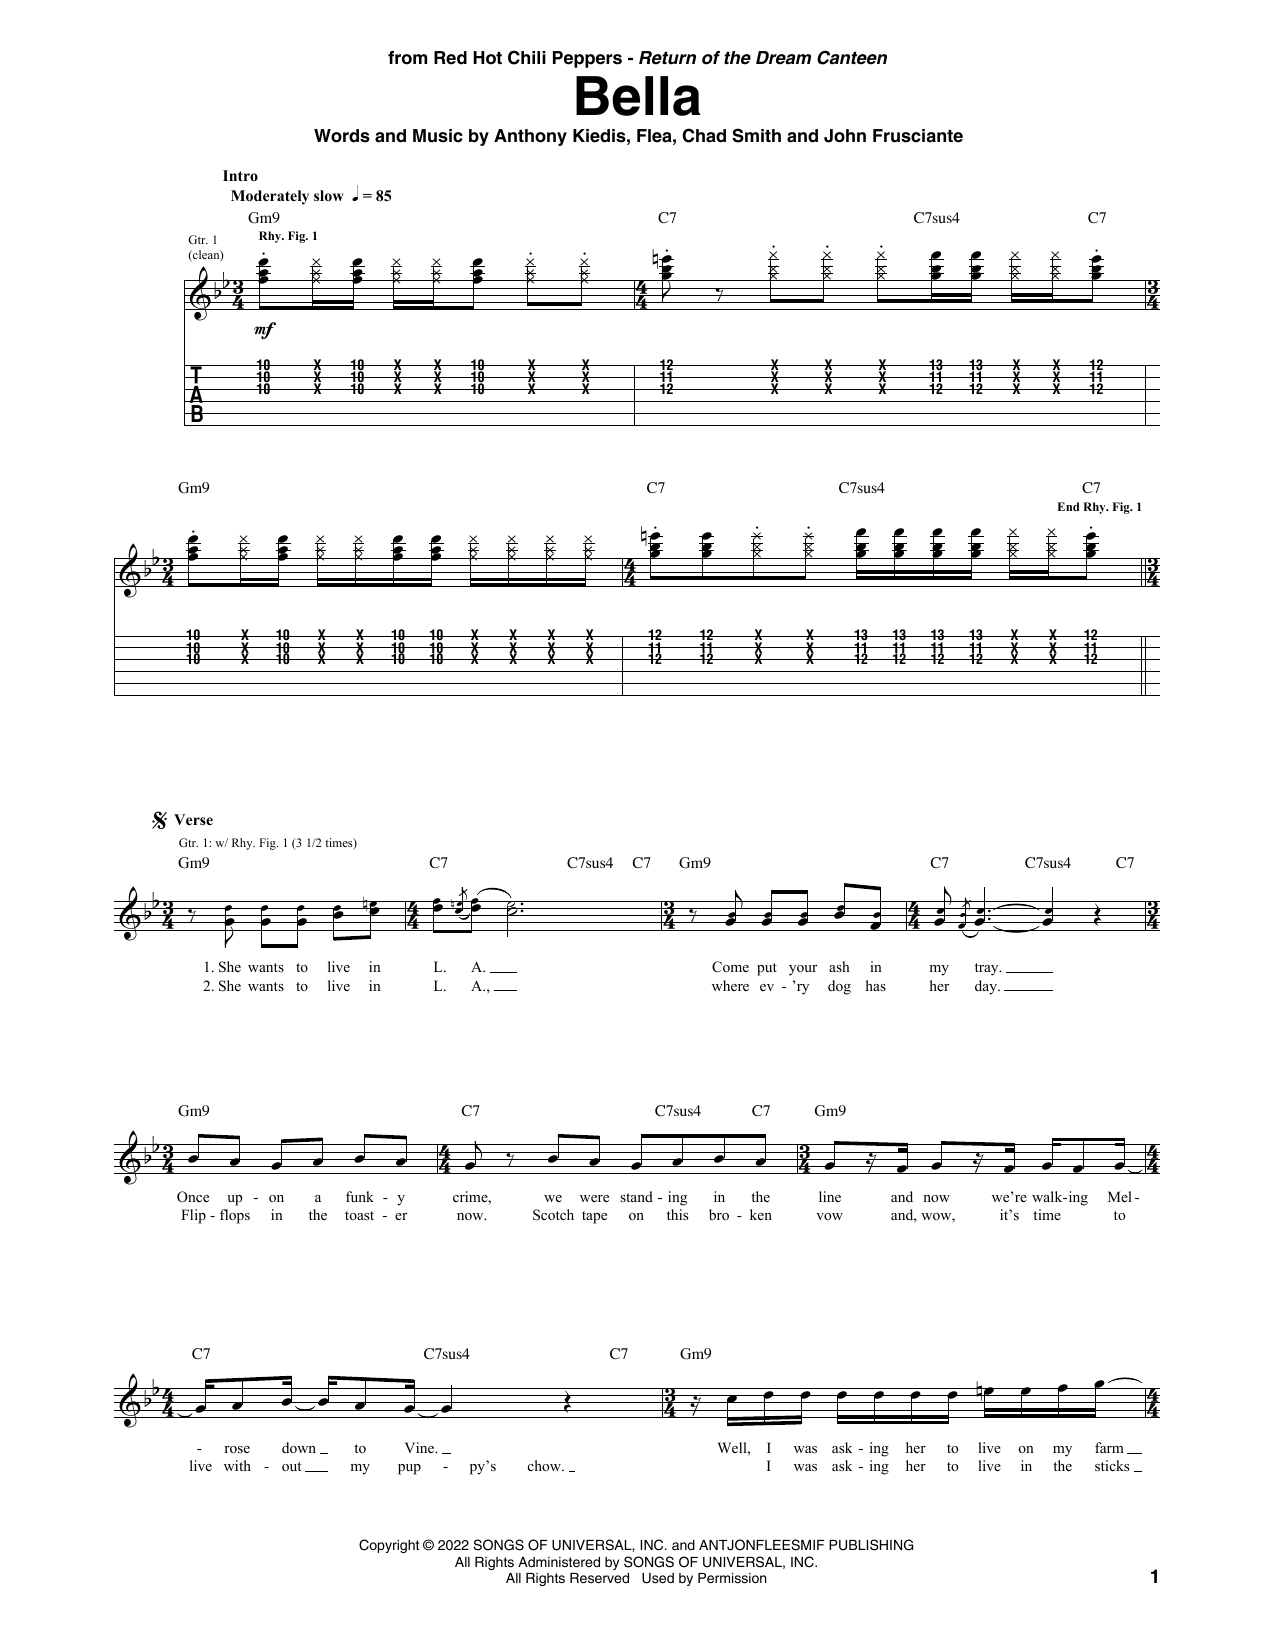 Download Red Hot Chili Peppers Bella Sheet Music